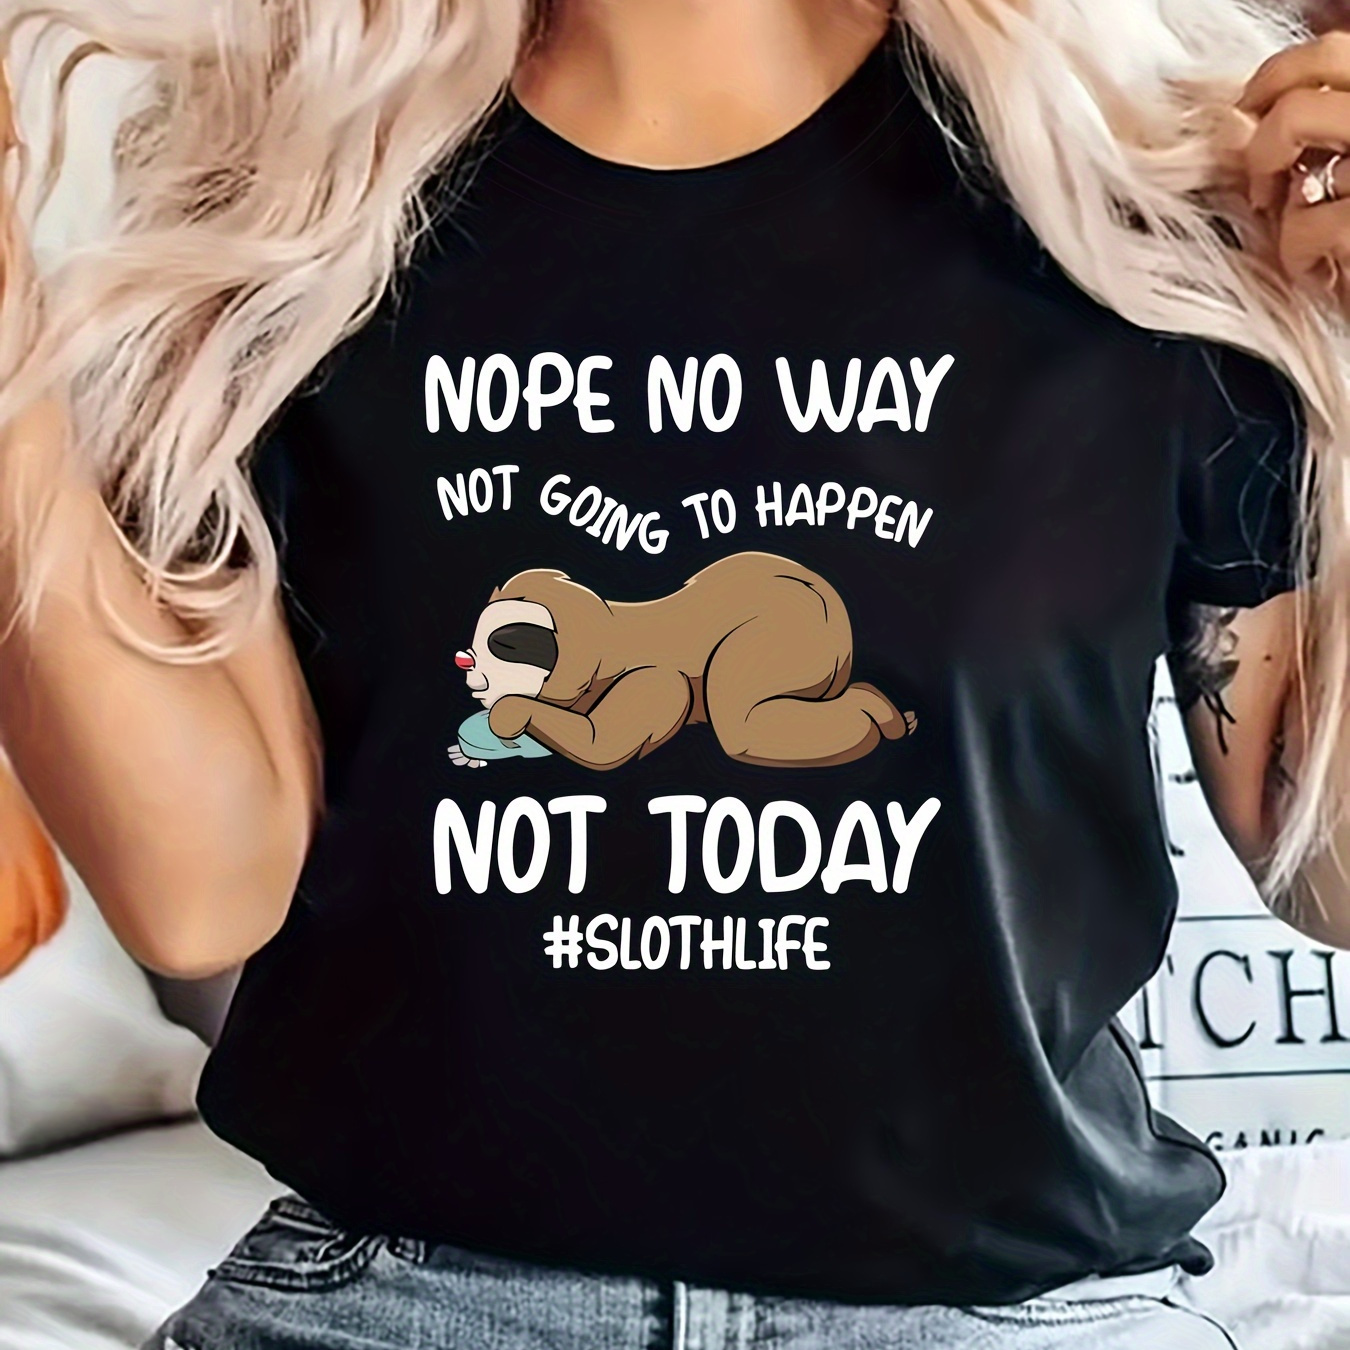 

Cute Cartoon Sloth Print T-shirt, Short Sleeve Crew Neck Casual Top For Summer & Spring, Women's Clothing